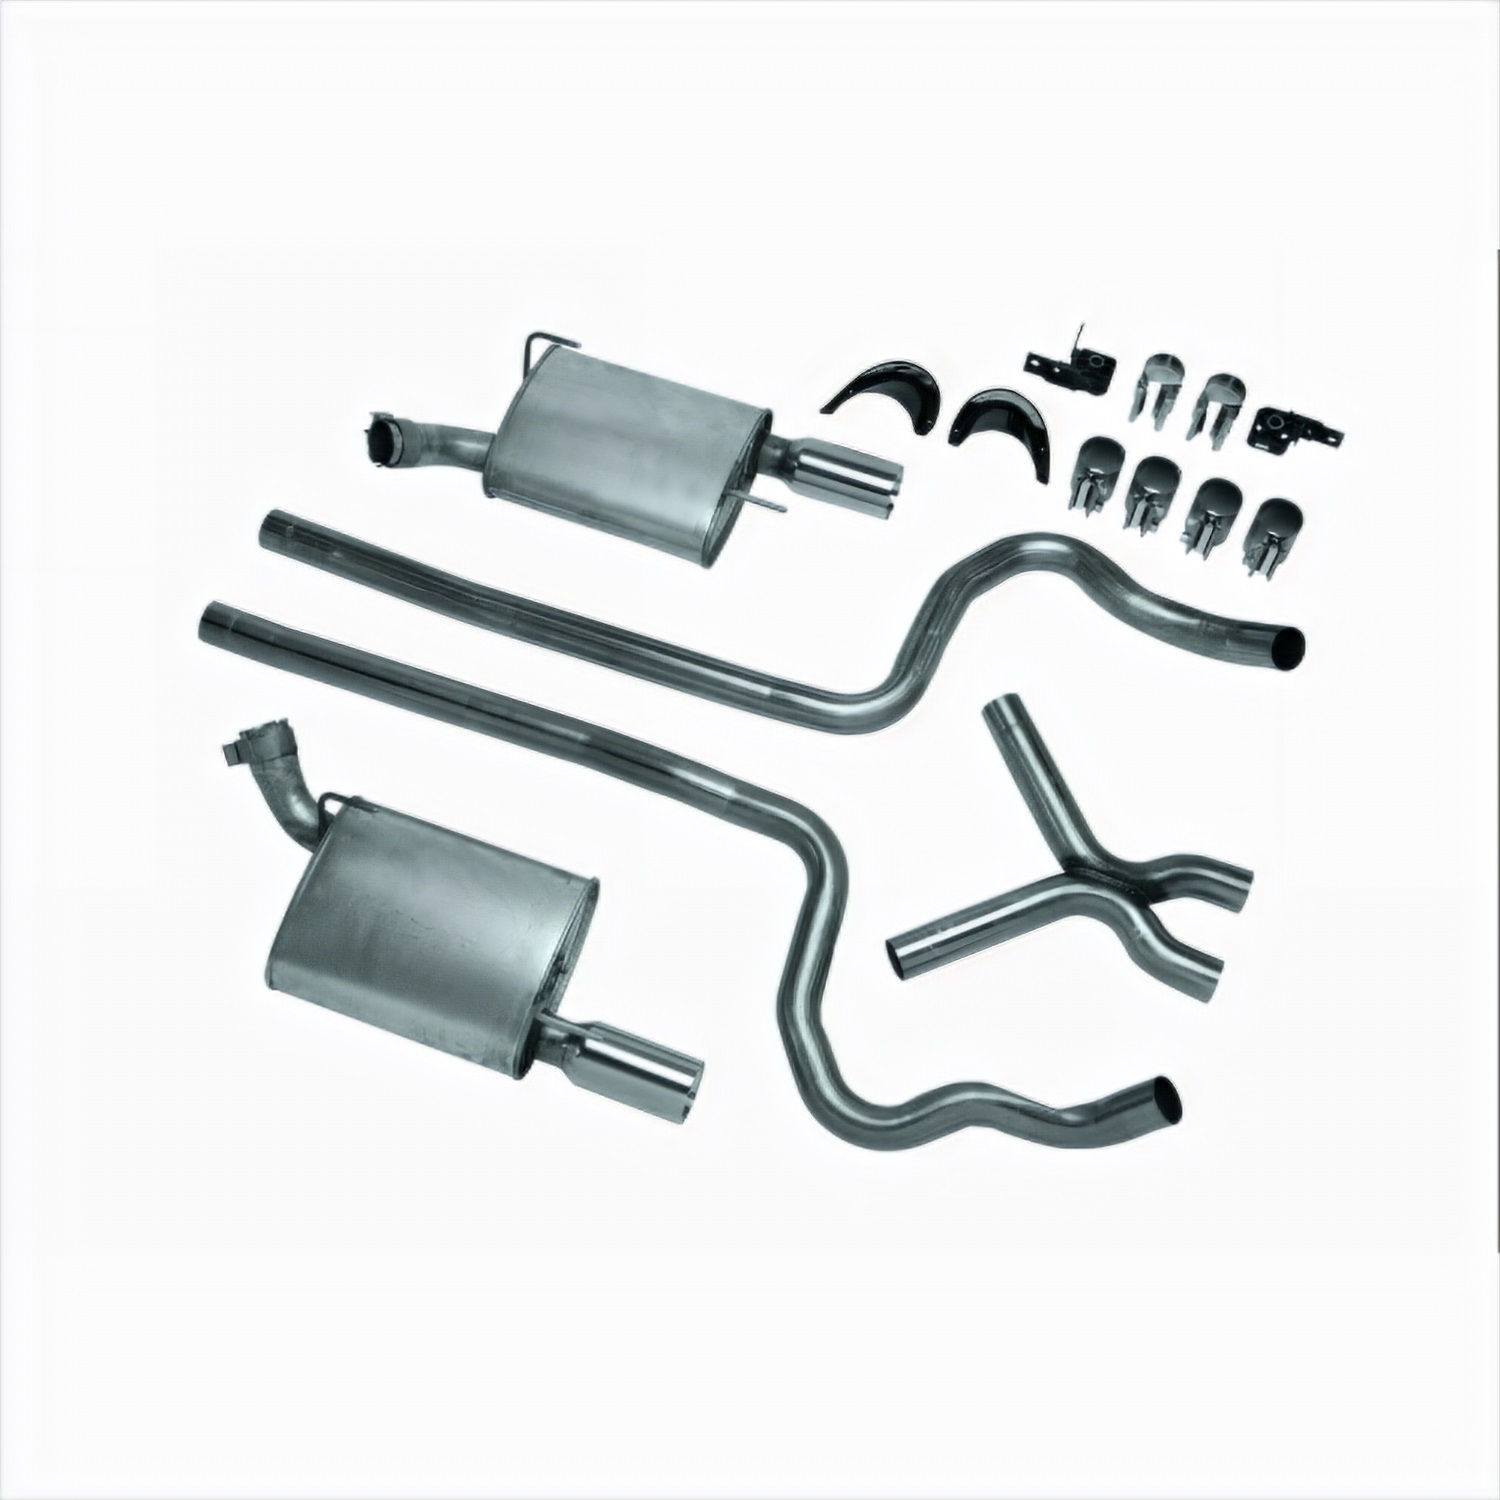 Ford Racing Ford Racing M-5230-V6 Mustang V6 Touring Dual Exhaust Kit Fits 05-09 Mustang